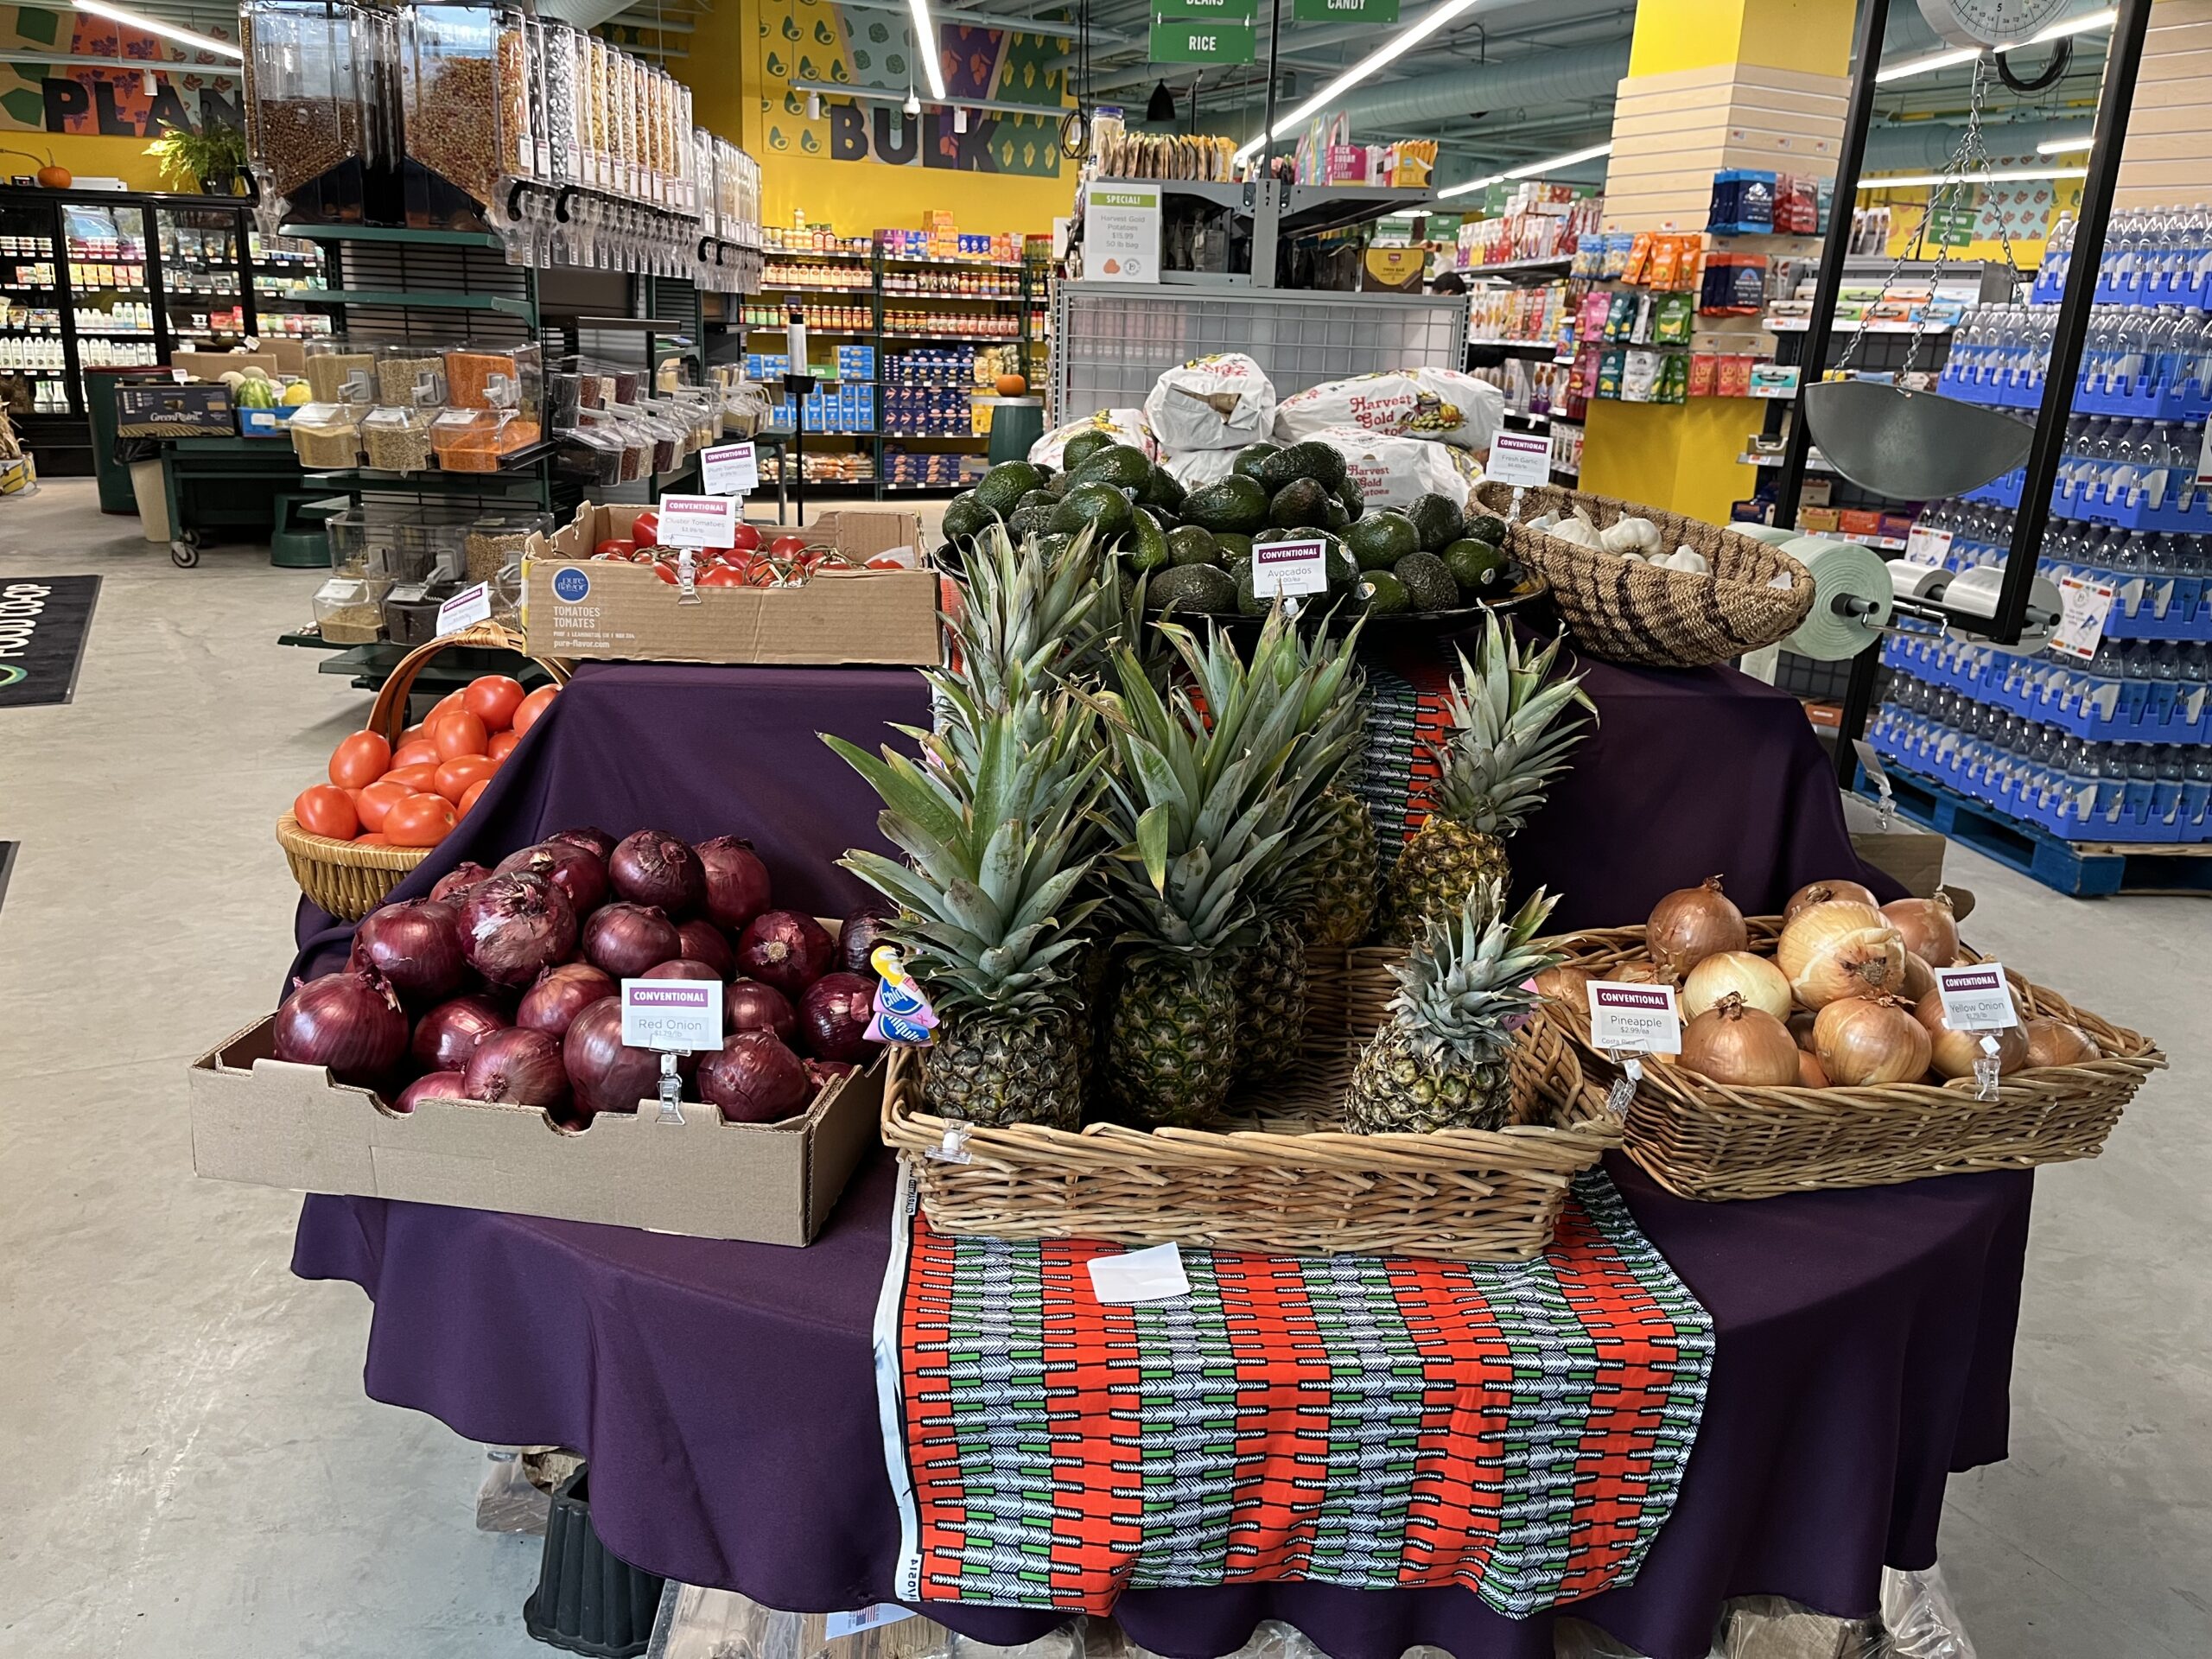 pineapples, onions, and other produce arranged on a table